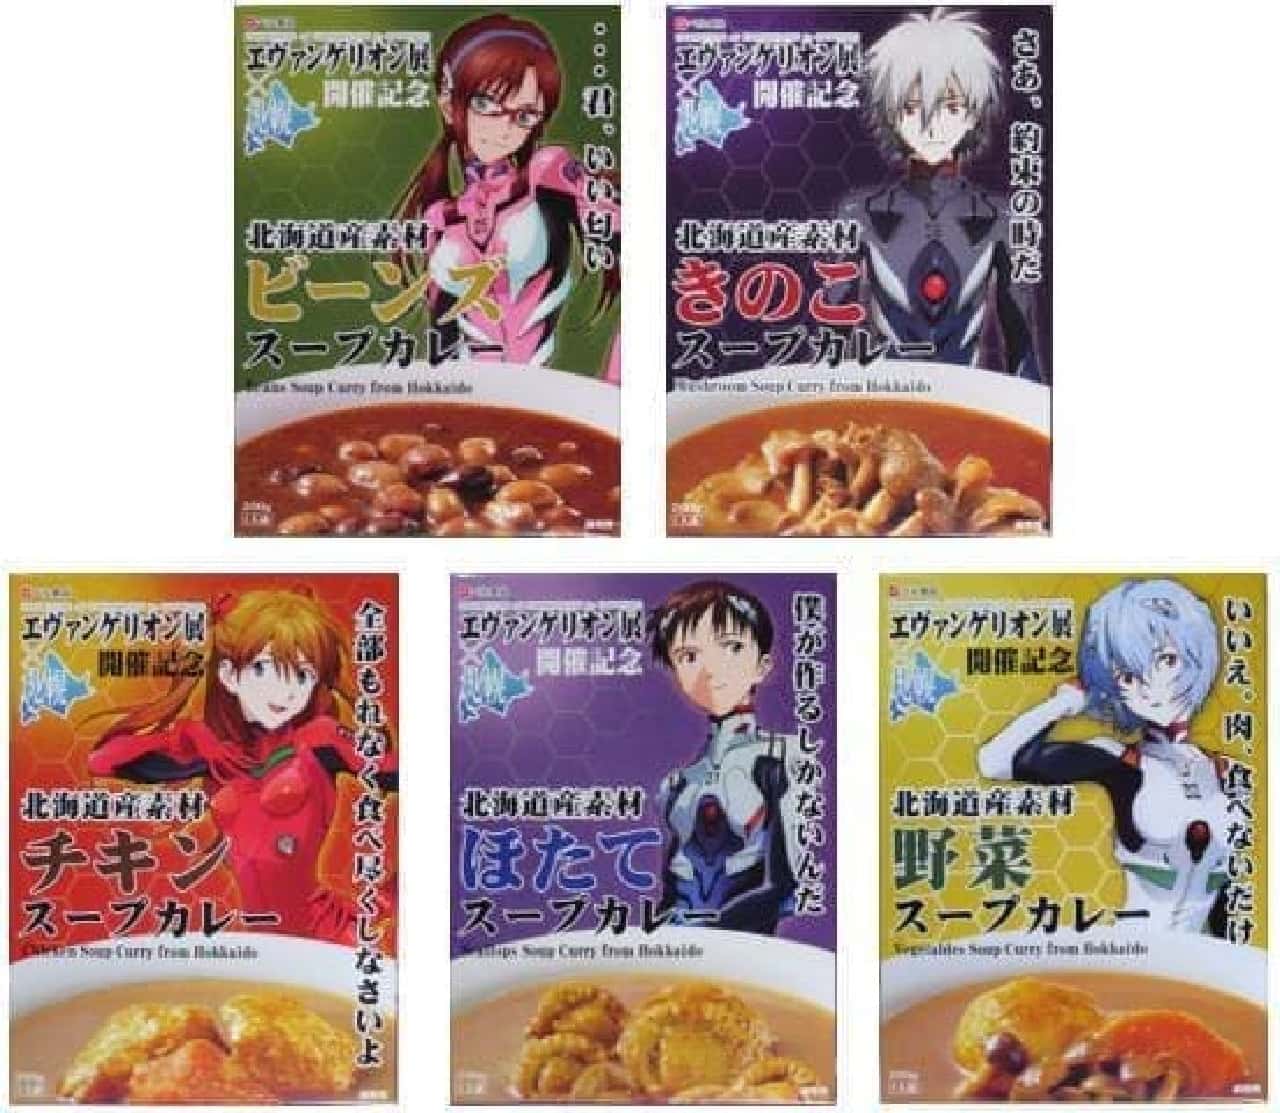 Lineup of "Evangelion Exhibition x Hokkaido Material Soup Curry"